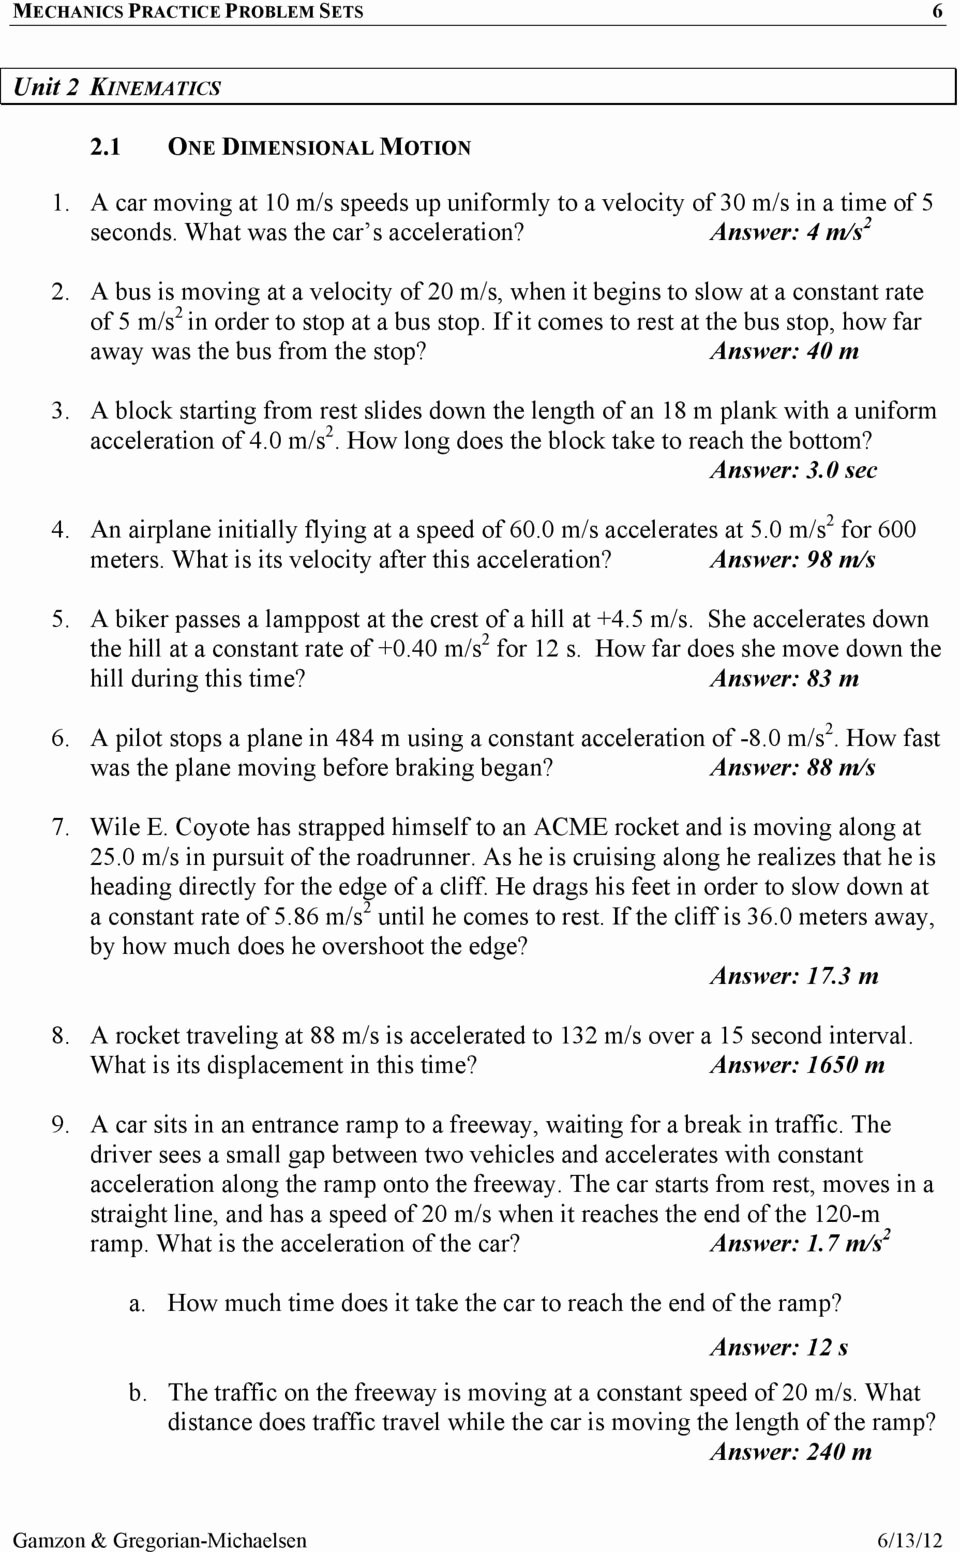 Acceleration Practice Problems Worksheet Best Of Activity Based Physics Pdf